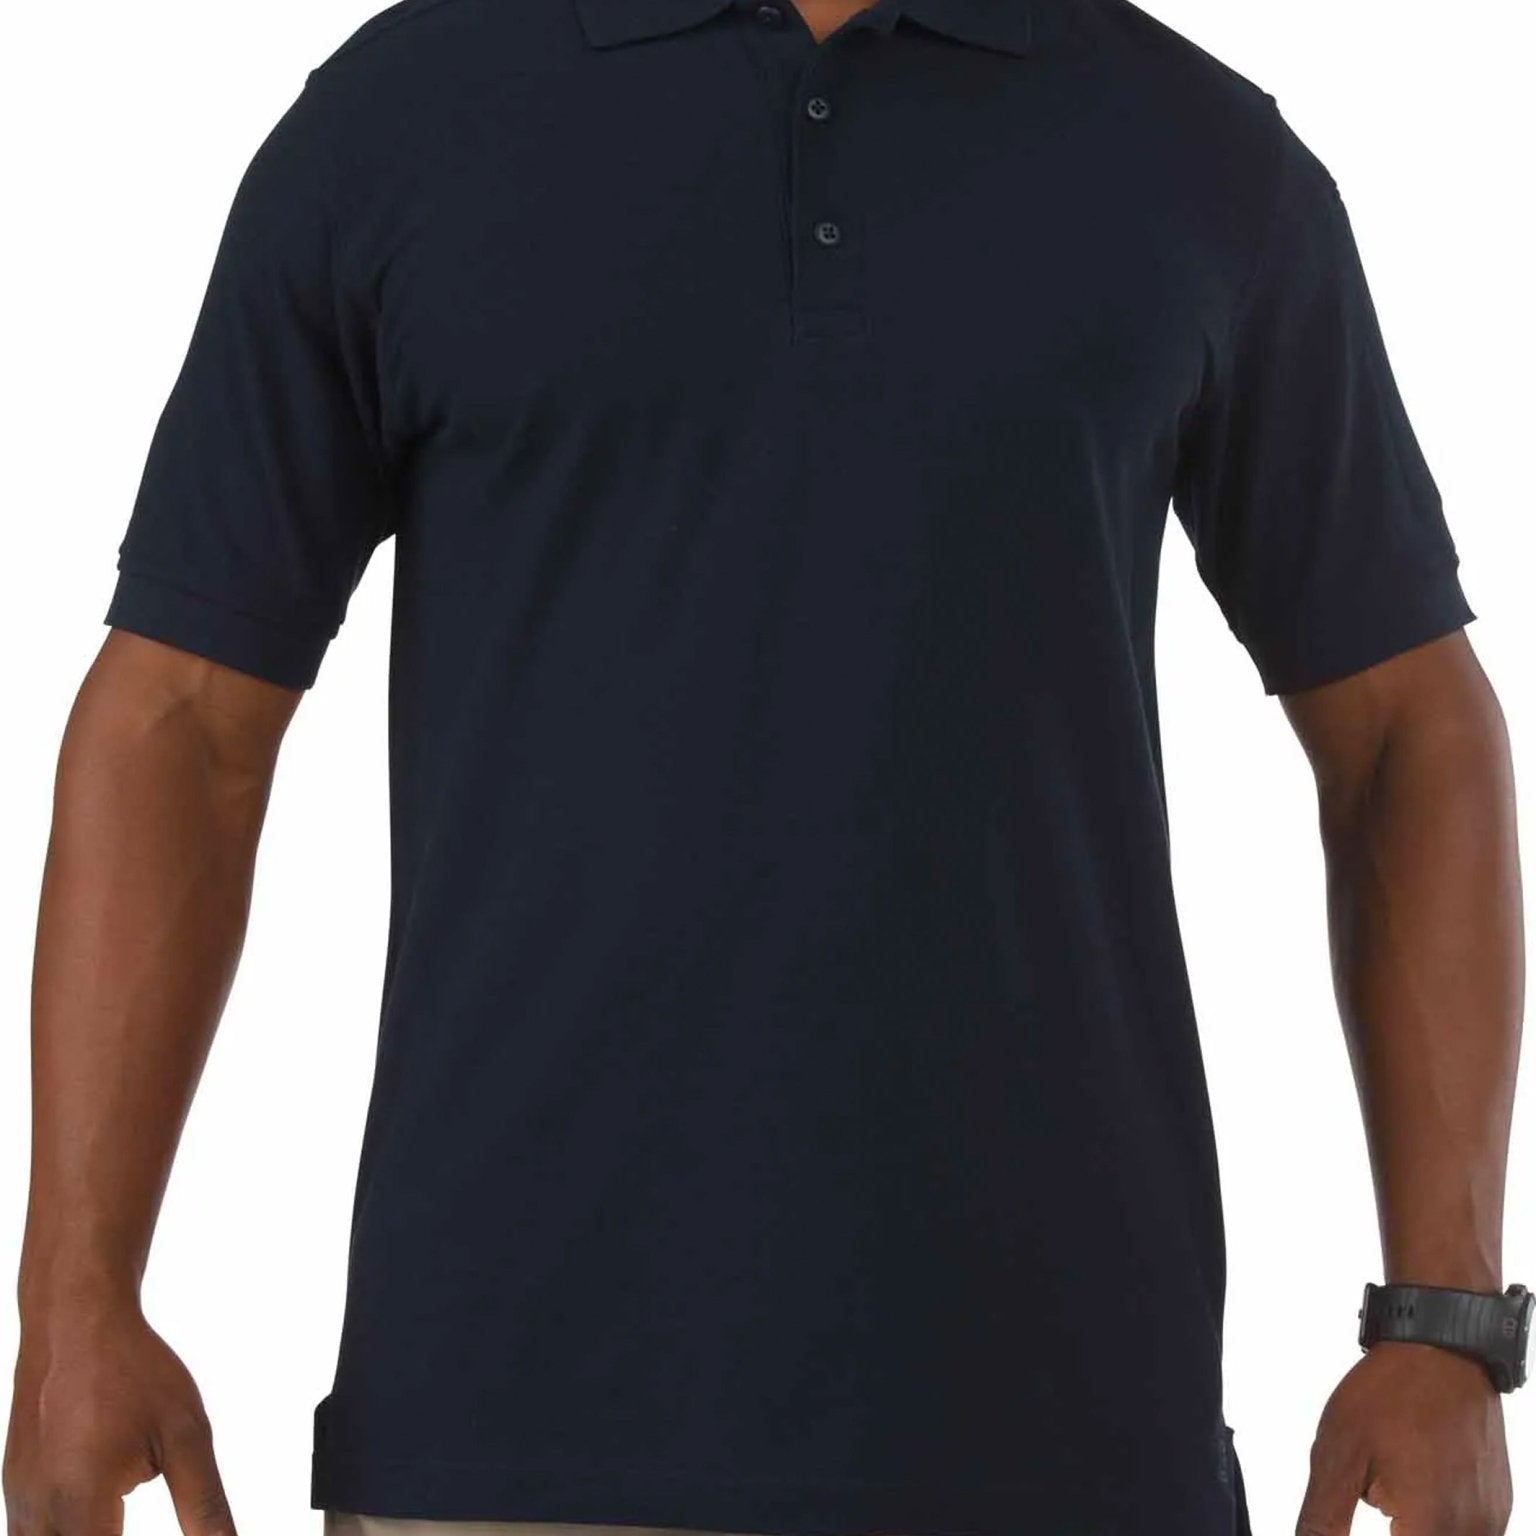 4elementsclothing5.11 Tactical5.11 Tactical - 5.11 Utility Short Sleeve Polo Shirt - Cotton / Polyester Pique - Style 41180T-Shirt41180-724-XS